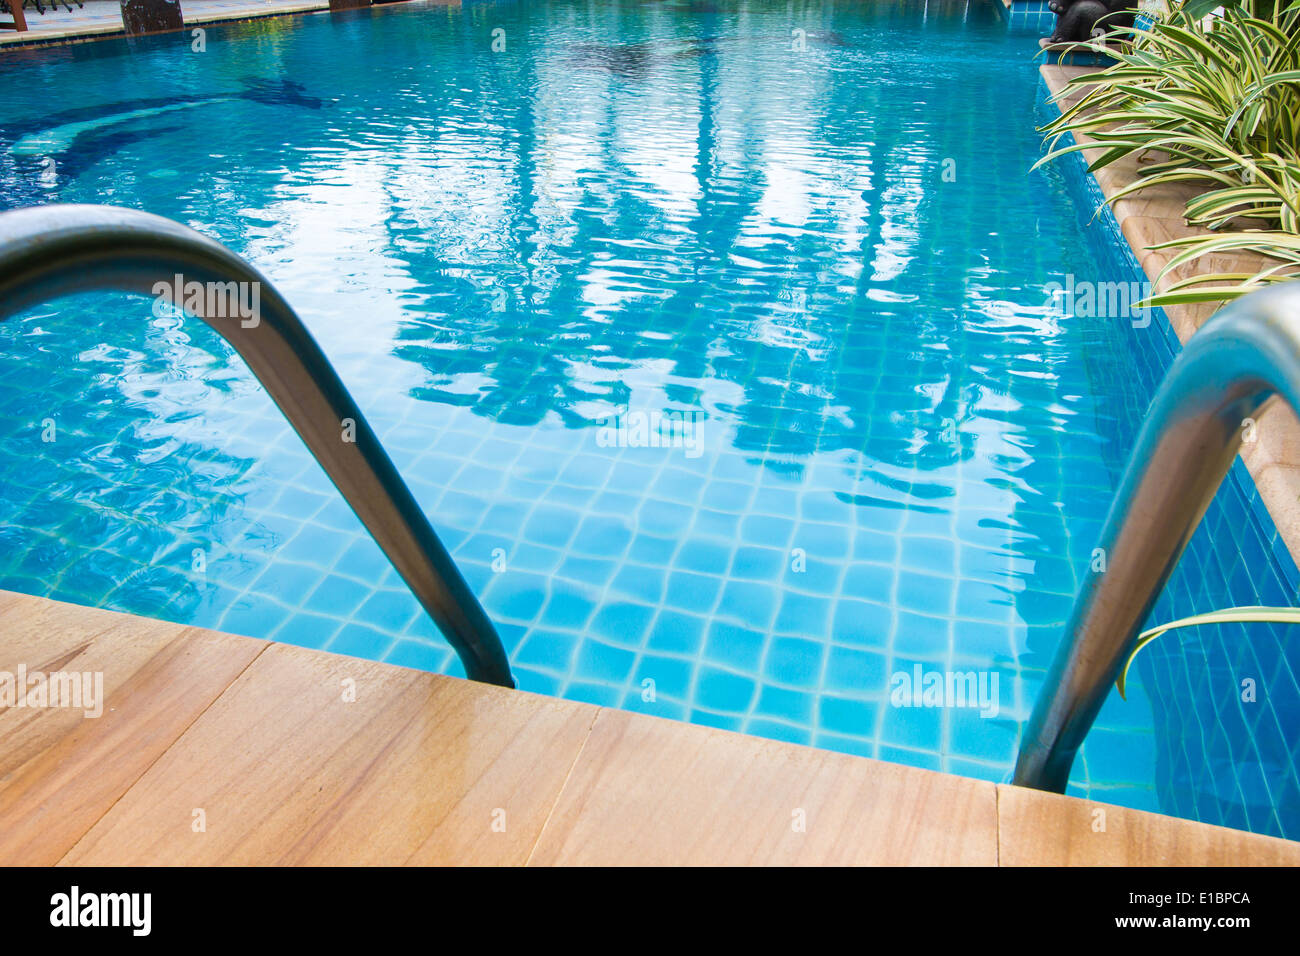 swimming pool with stair nobody nature environment background Stock Photo